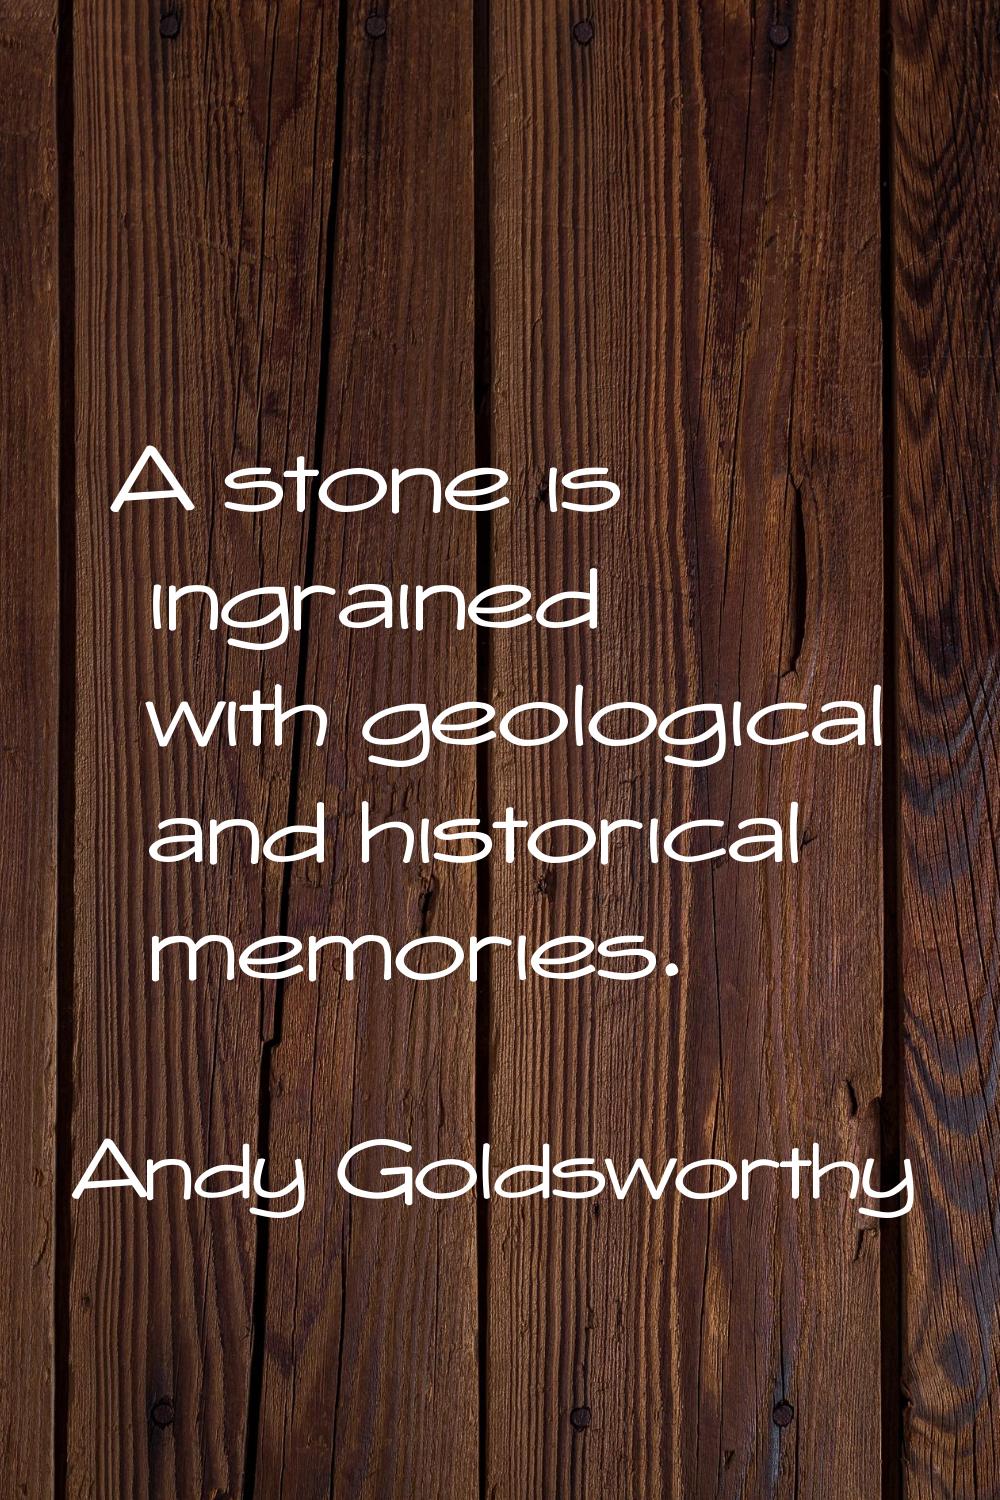 A stone is ingrained with geological and historical memories.